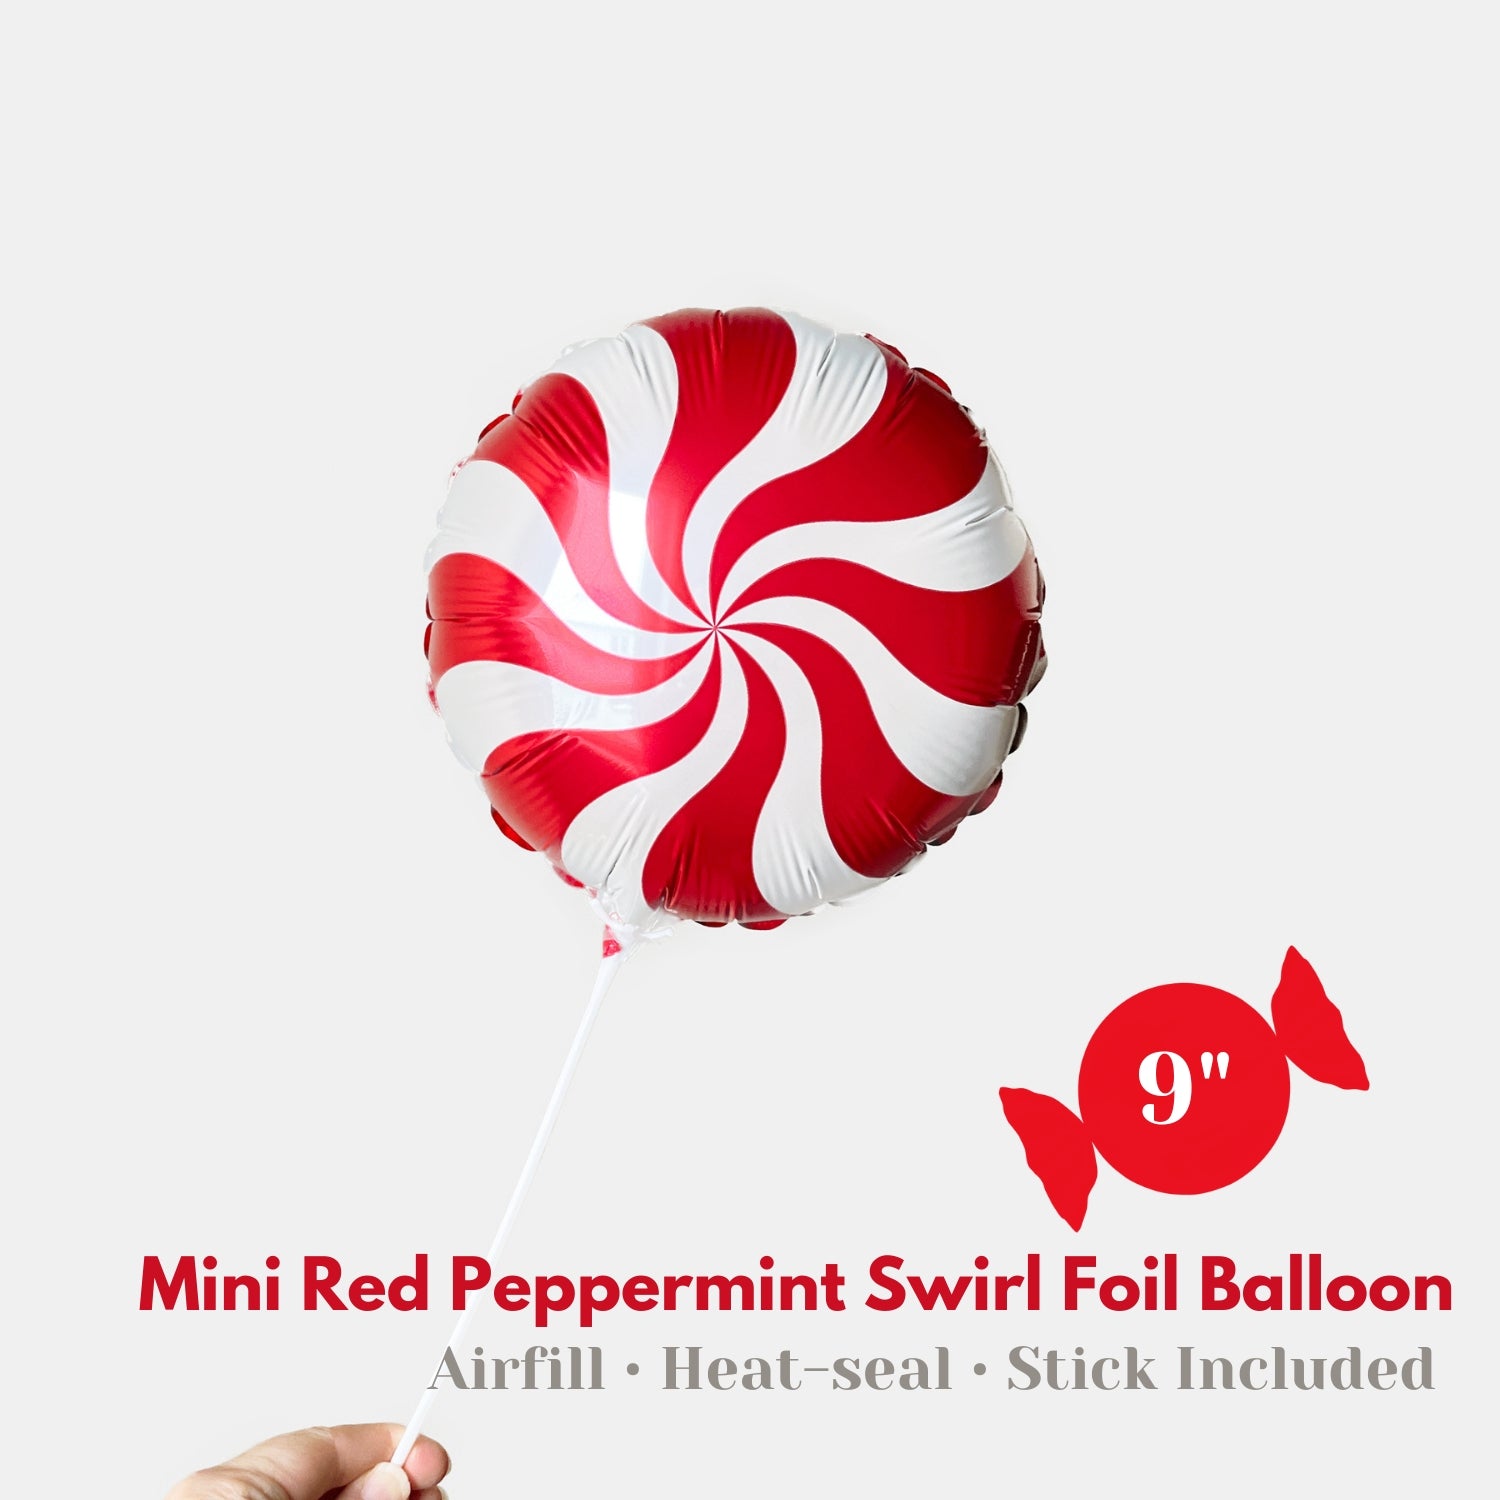 Mini Air-fill Red White Peppermint Swirl Candy Foil Balloon 9" - Christmas Party Loot Bag Party Favor - Winter Holiday Photo Prop